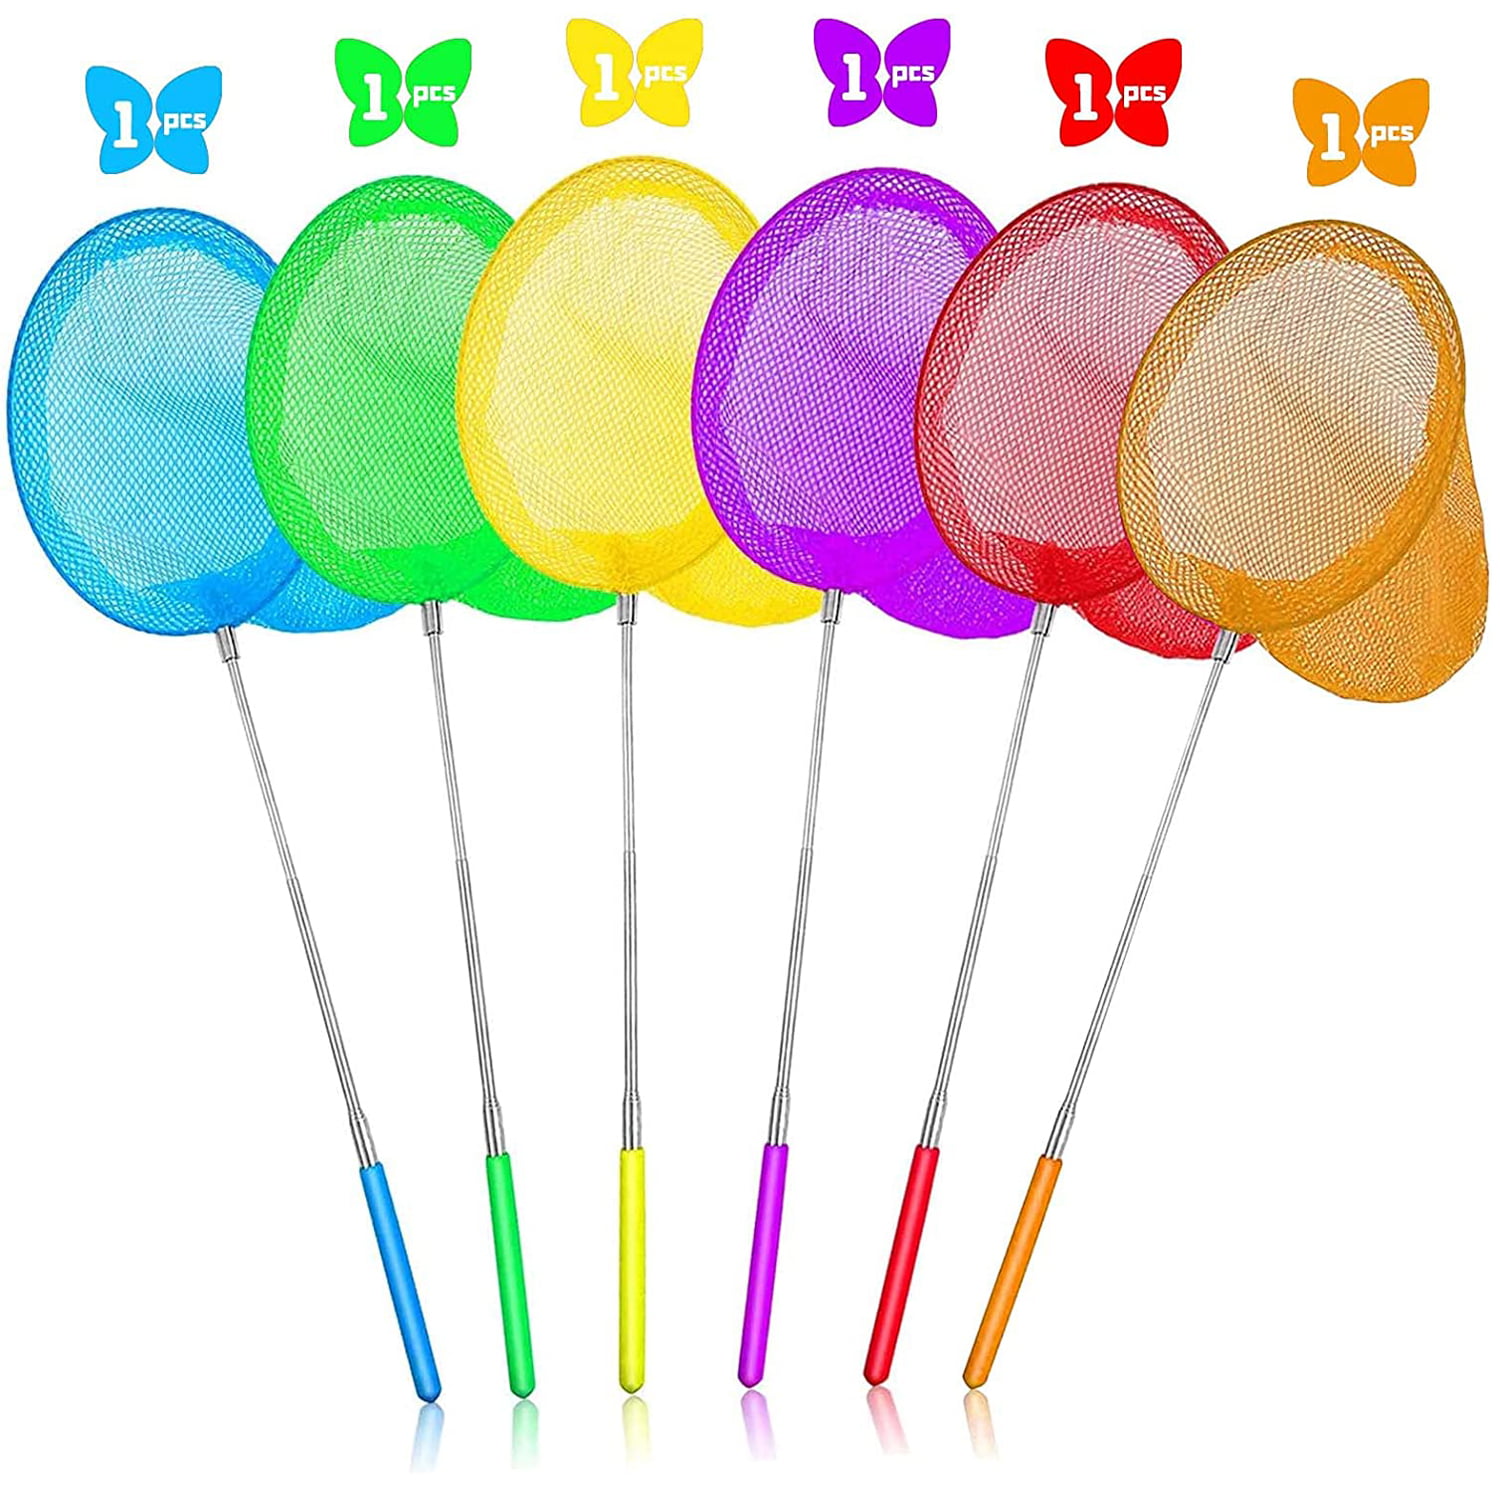 Details about   Fishing Net Extendable Telescopic Net Butterfly Insect Bug For Kids Mesh D0S1 